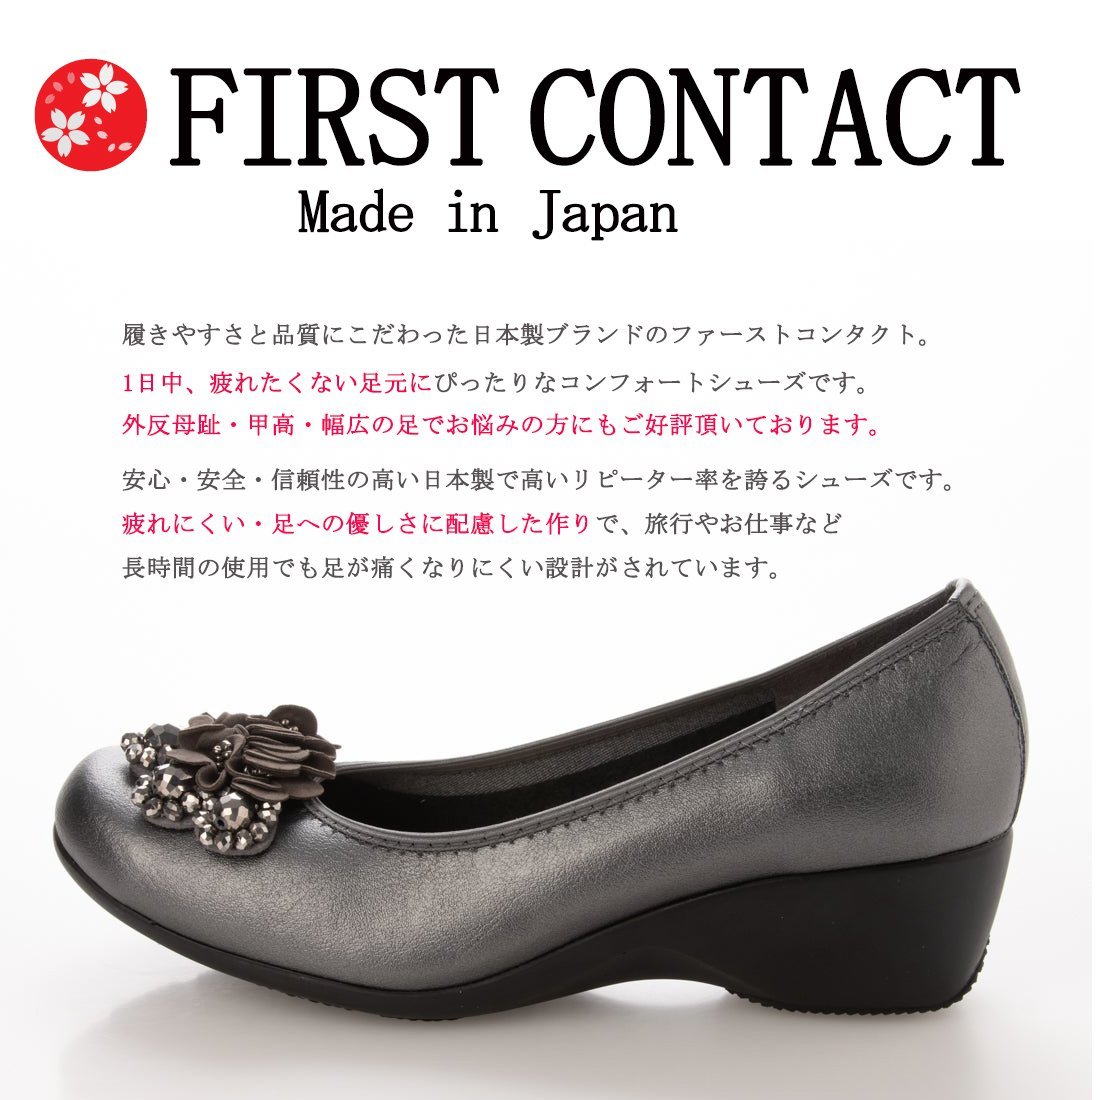 37lk free shipping First Contact pumps made in Japan biju- pain . not Mother's Day Wedge comfort runs casual office through 